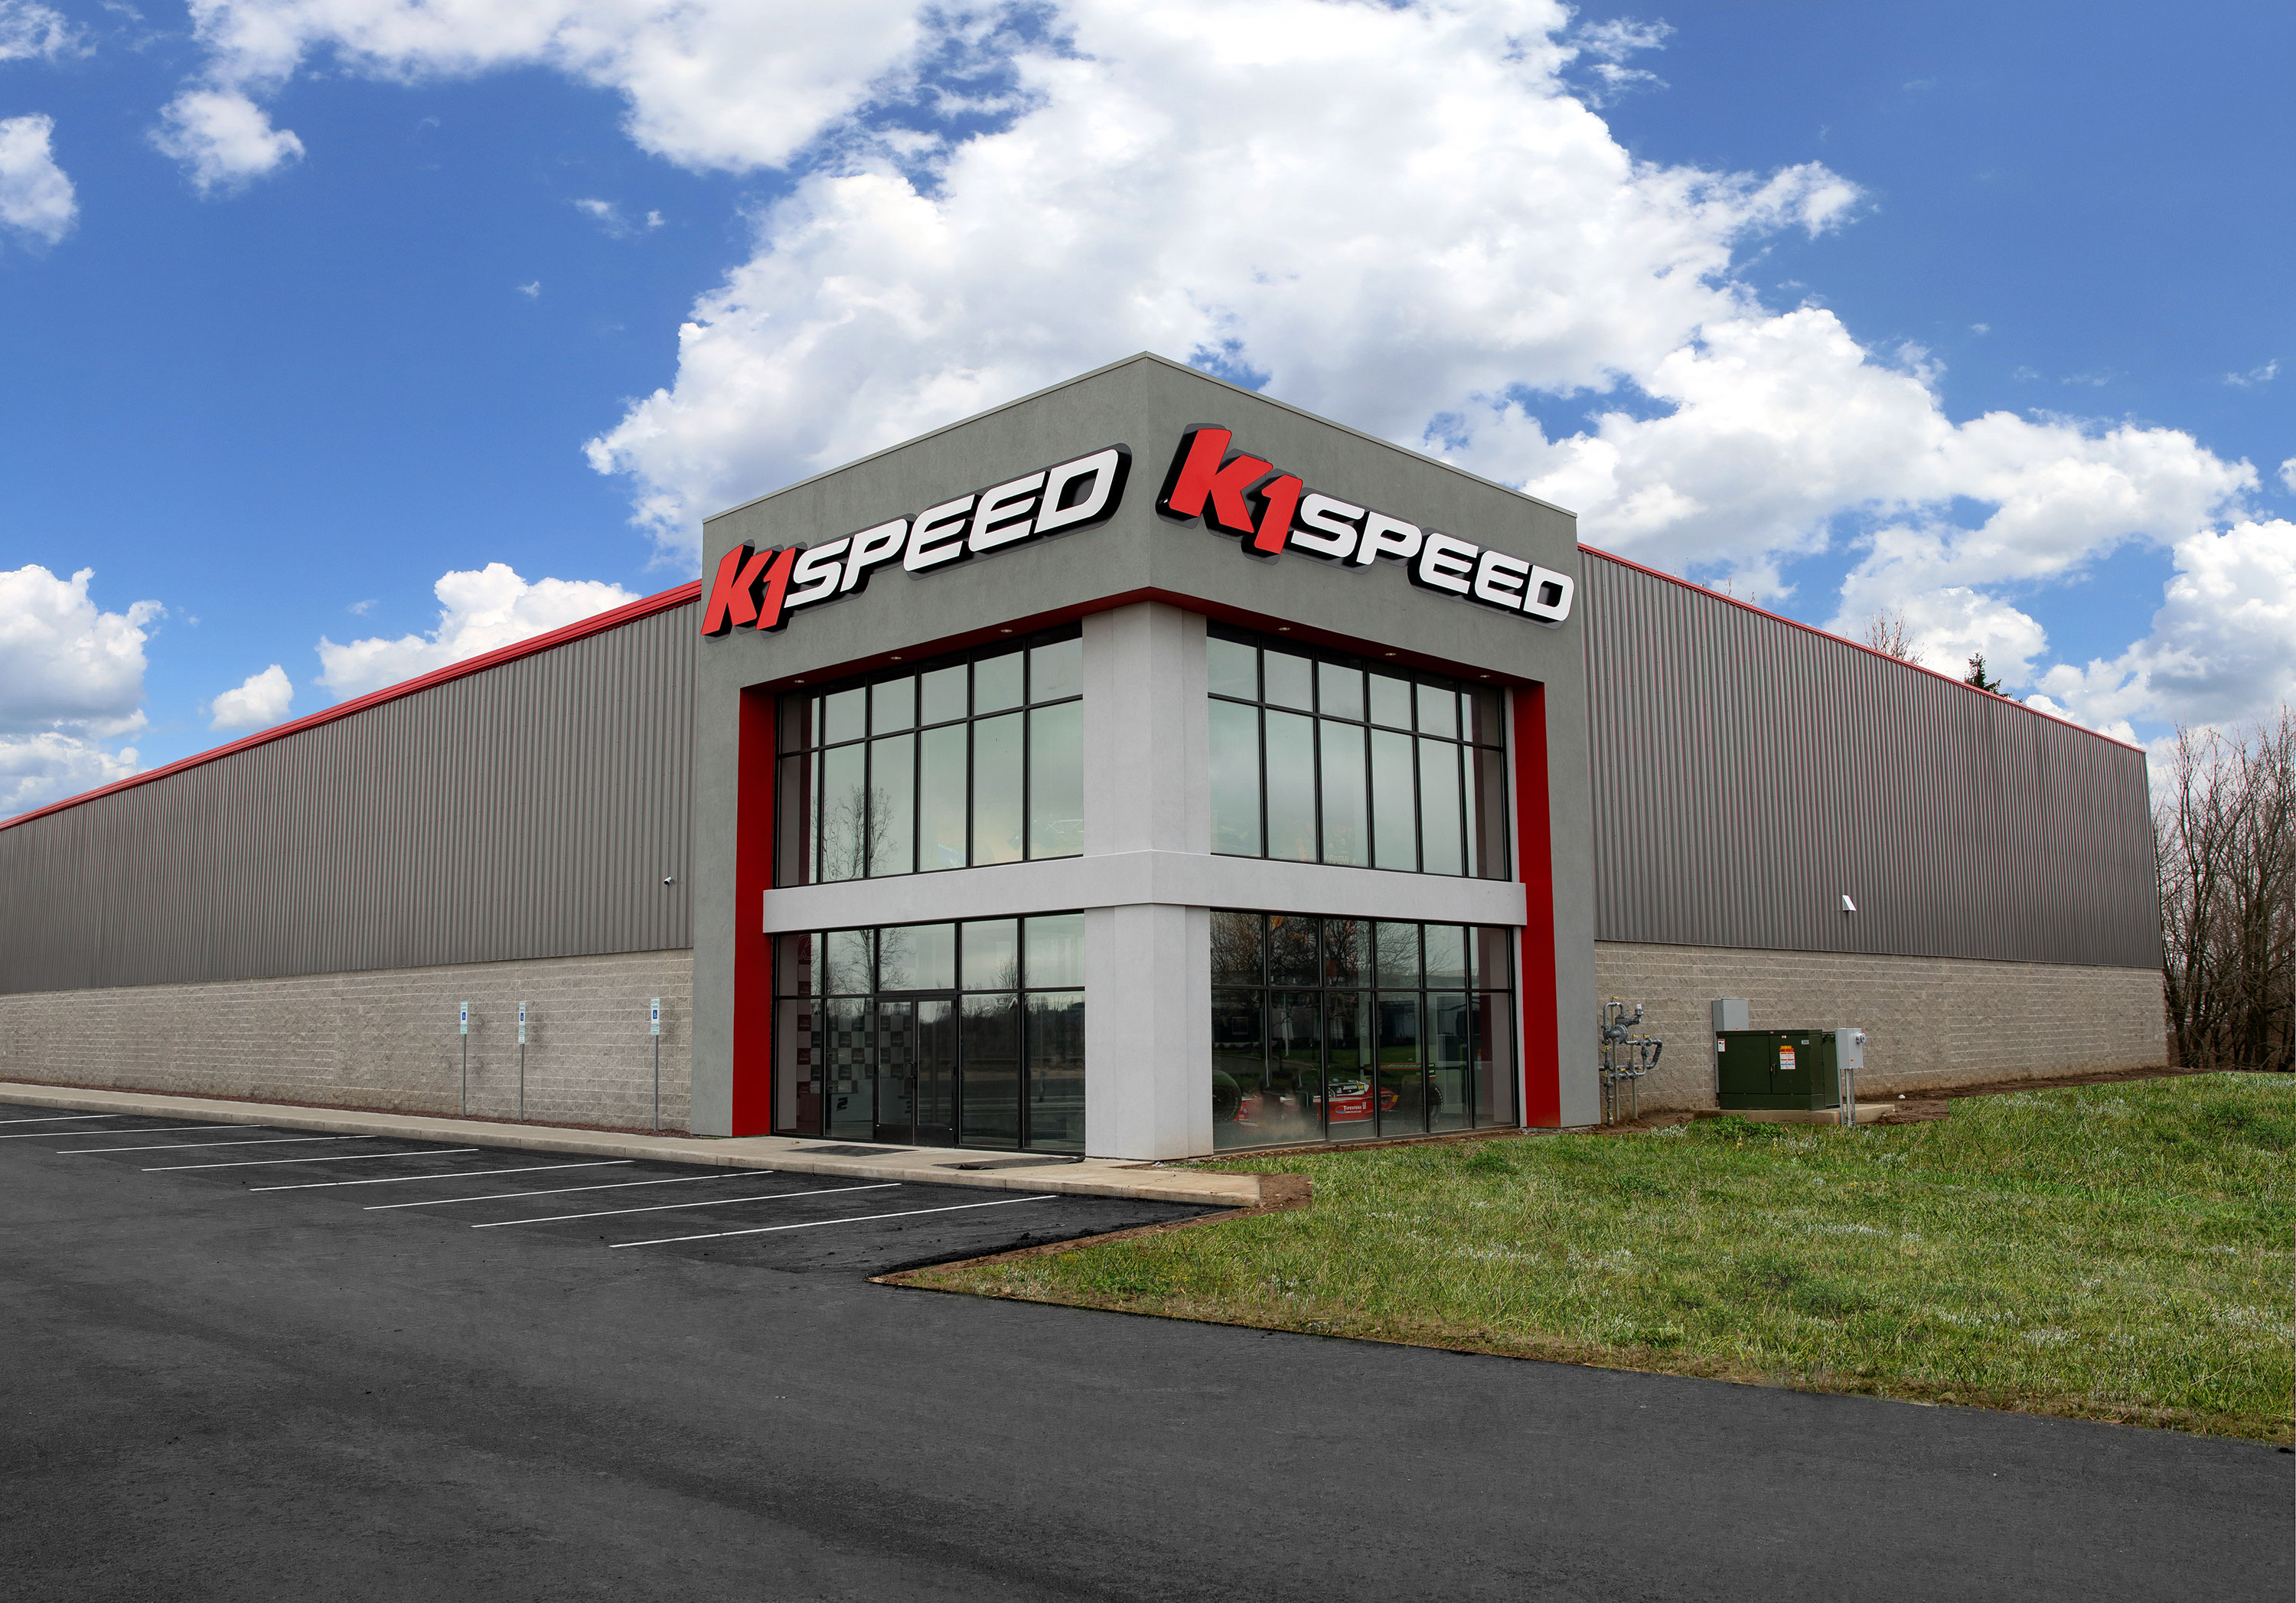 The exterior of K1 Speed Canton in Ohio, the latest indoor go kart racing center from K1 Speed